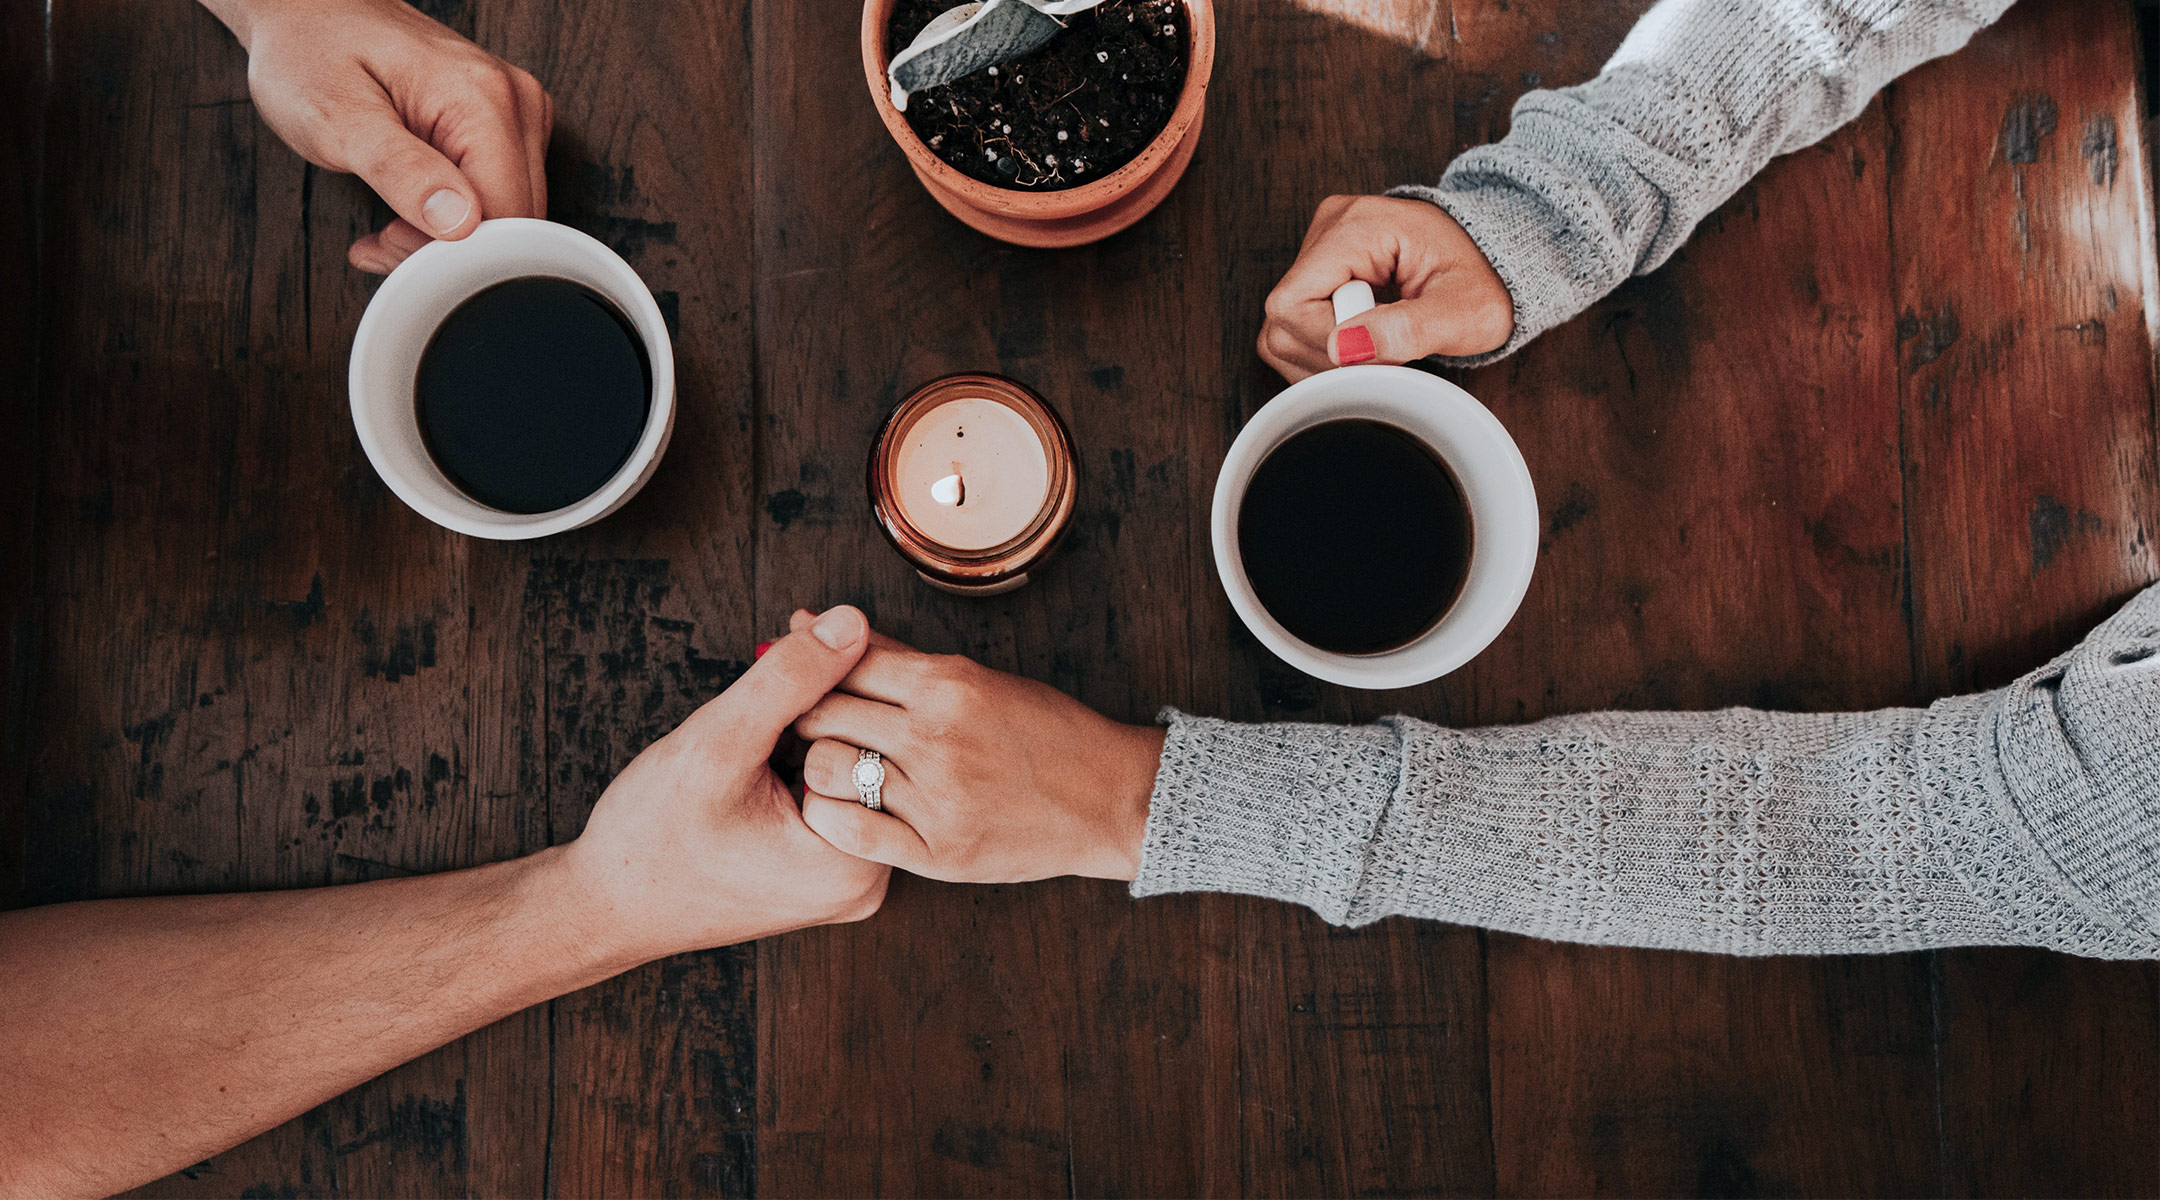 sad couple holding hands across table with coffee